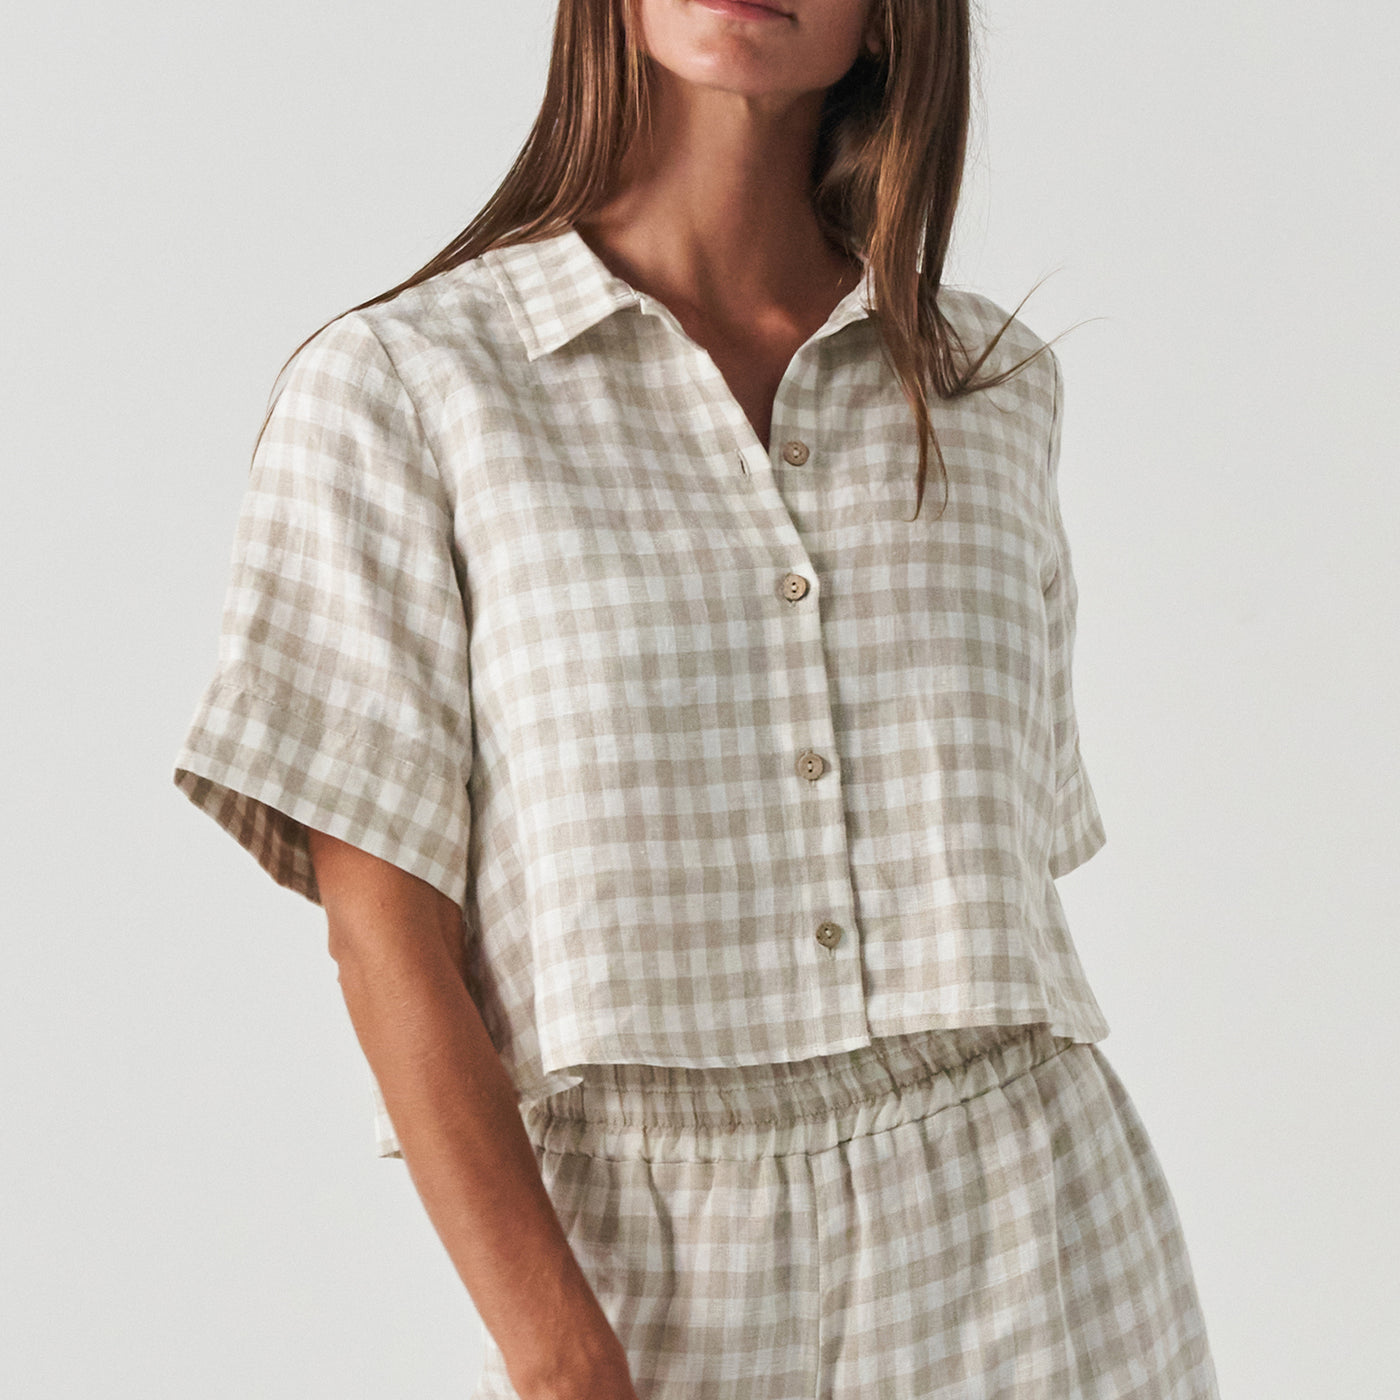 French Flax Linen Poppy Shirt in Beige Gingham